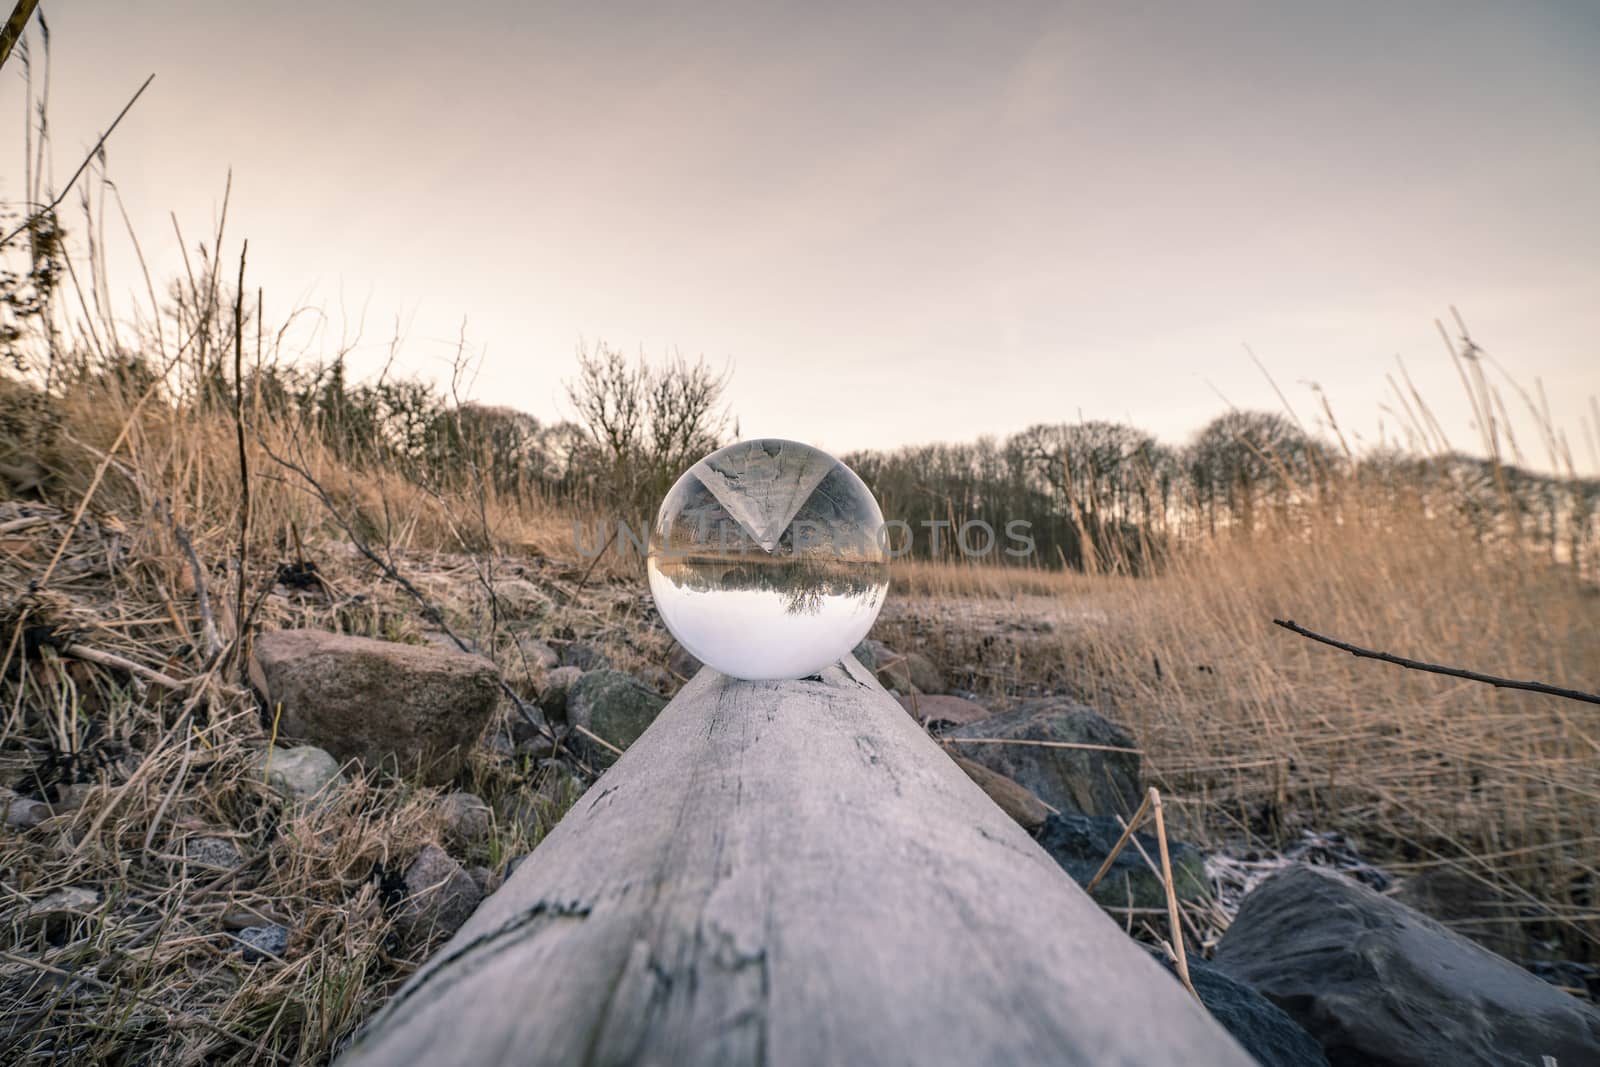 Crystal ball in balance on a wooden log by Sportactive